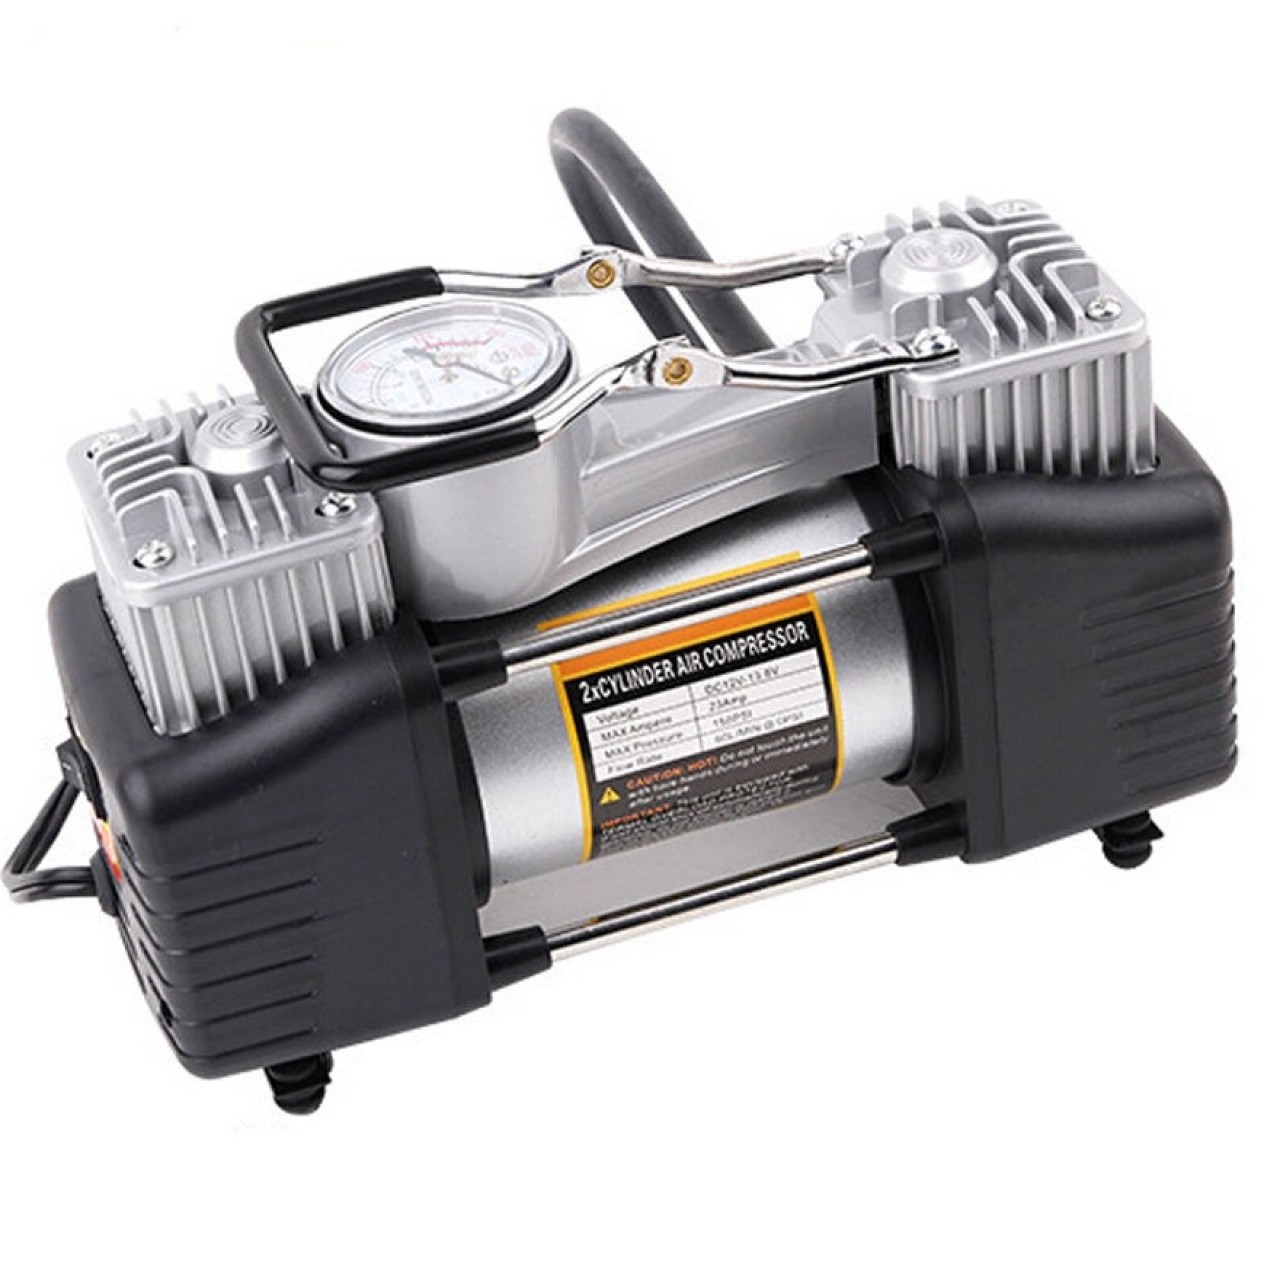 Heavy Duty Portable 2 Cylinder Air Compressor For Vehicles